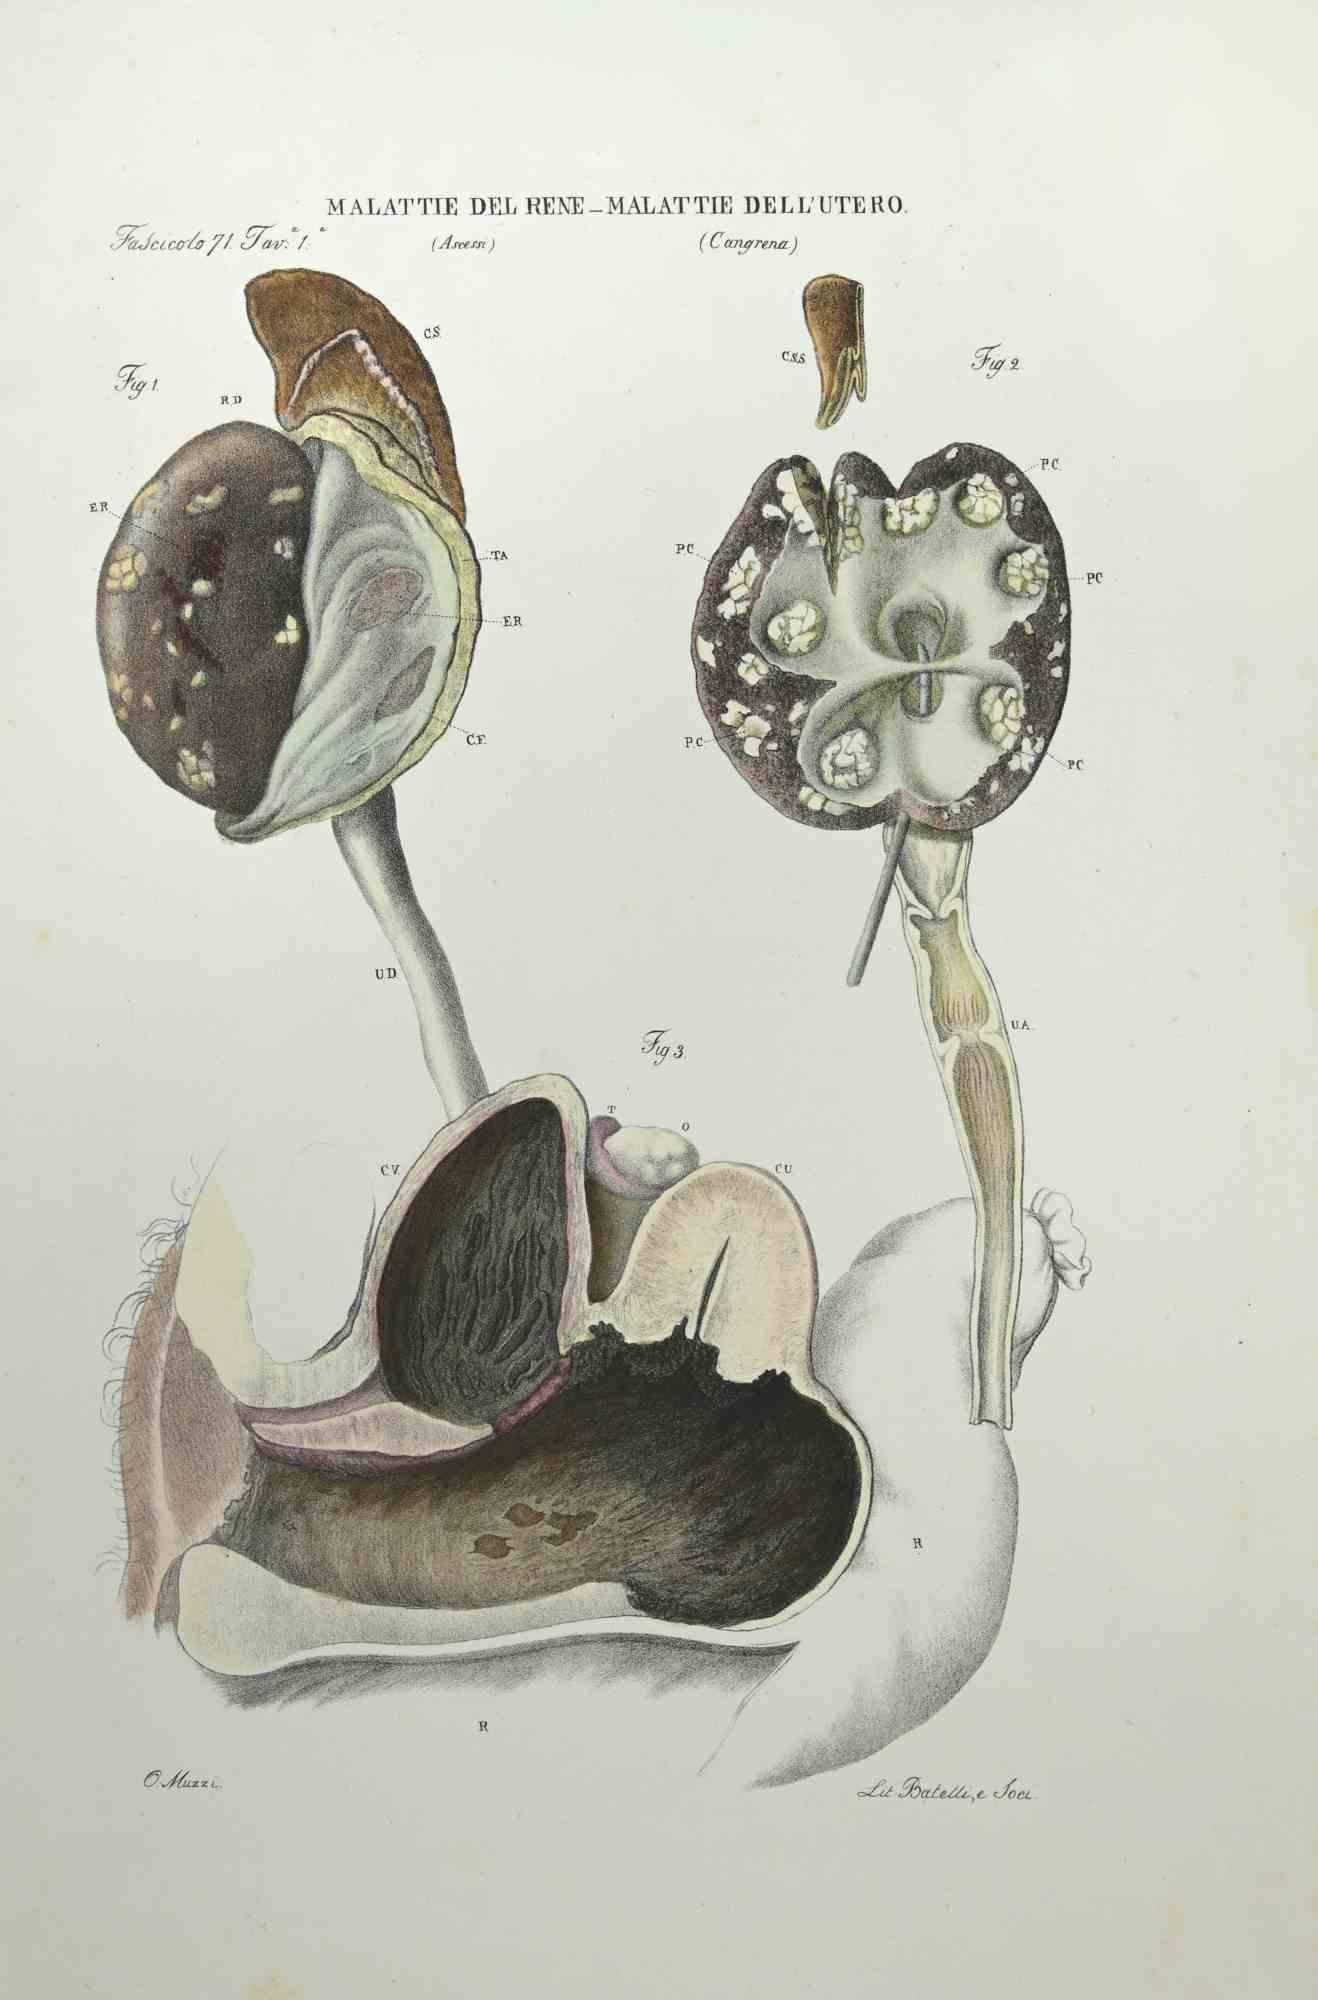 Kidney Diseases Uterus Diseases is a lithograph hand colored by Ottavio Muzzi for the edition of Antoine Chazal,Human Anatomy, Printers Batelli and Ridolfi, realized in 1843.

Signed on plate on the lower left margin.

The artwork belongs to the